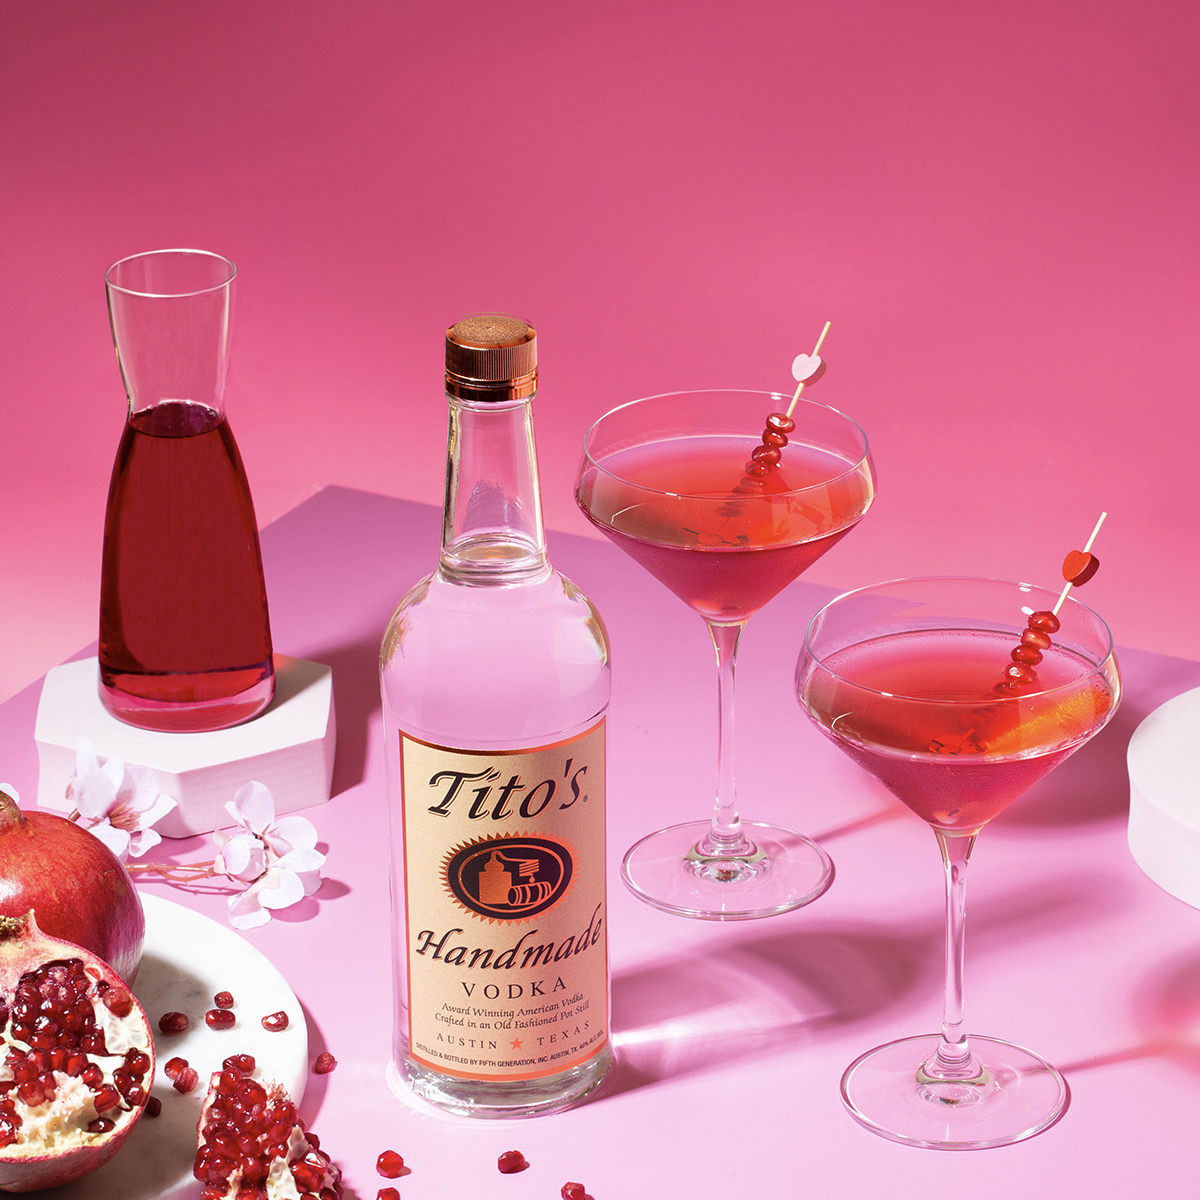 Tito's vodka bottle and cocktails with a pink theme and background